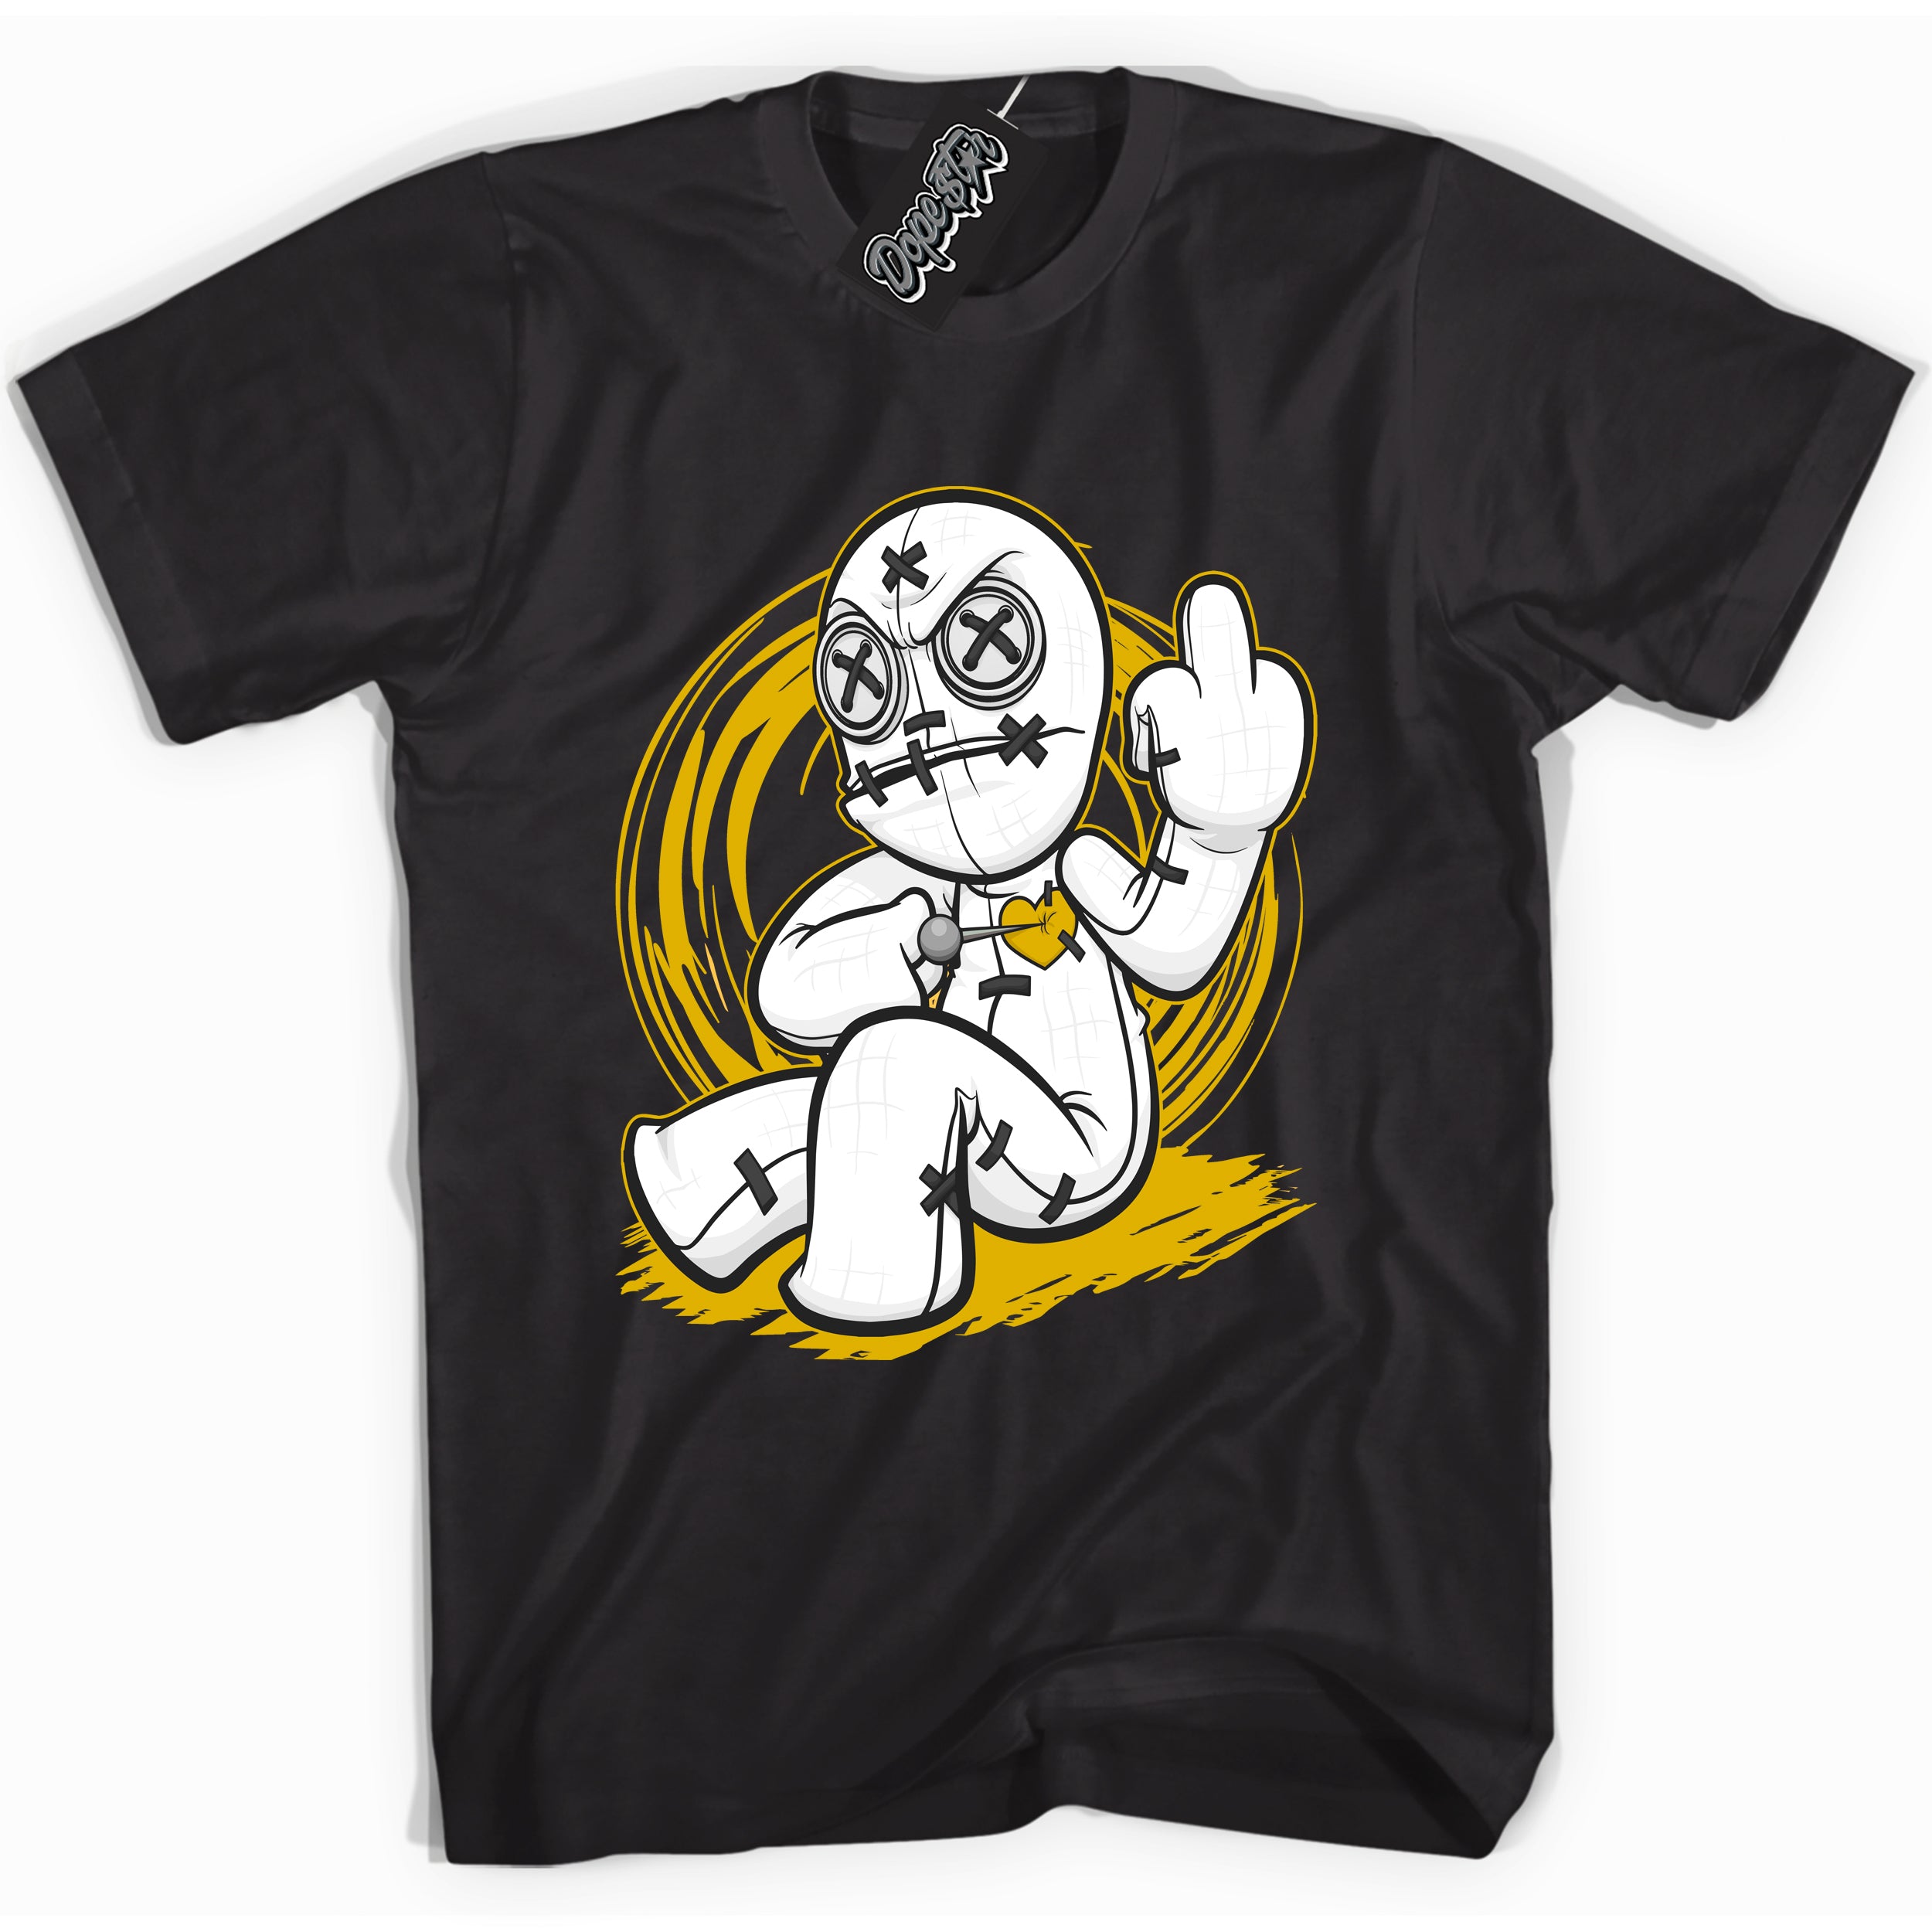 Cool Black Shirt with “ VooDoo Doll ” design that perfectly matches Yellow Ochre 6s Sneakers.